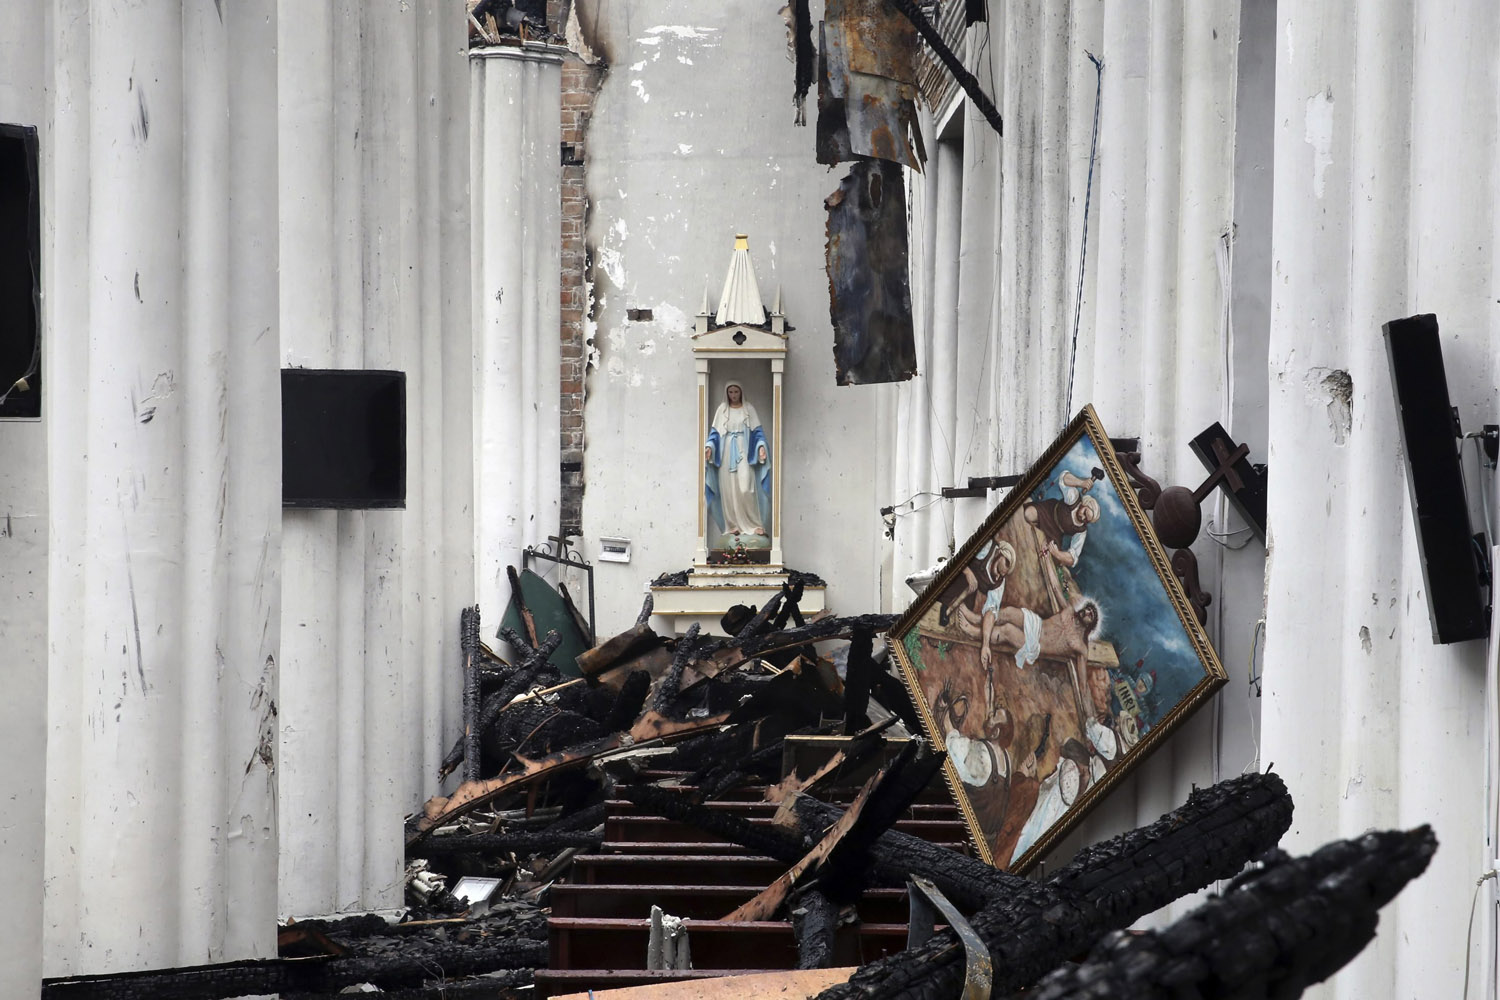 A sculpture and a painting are seen above debris after a fire at the Jiangbei Cathedral in Ningbo